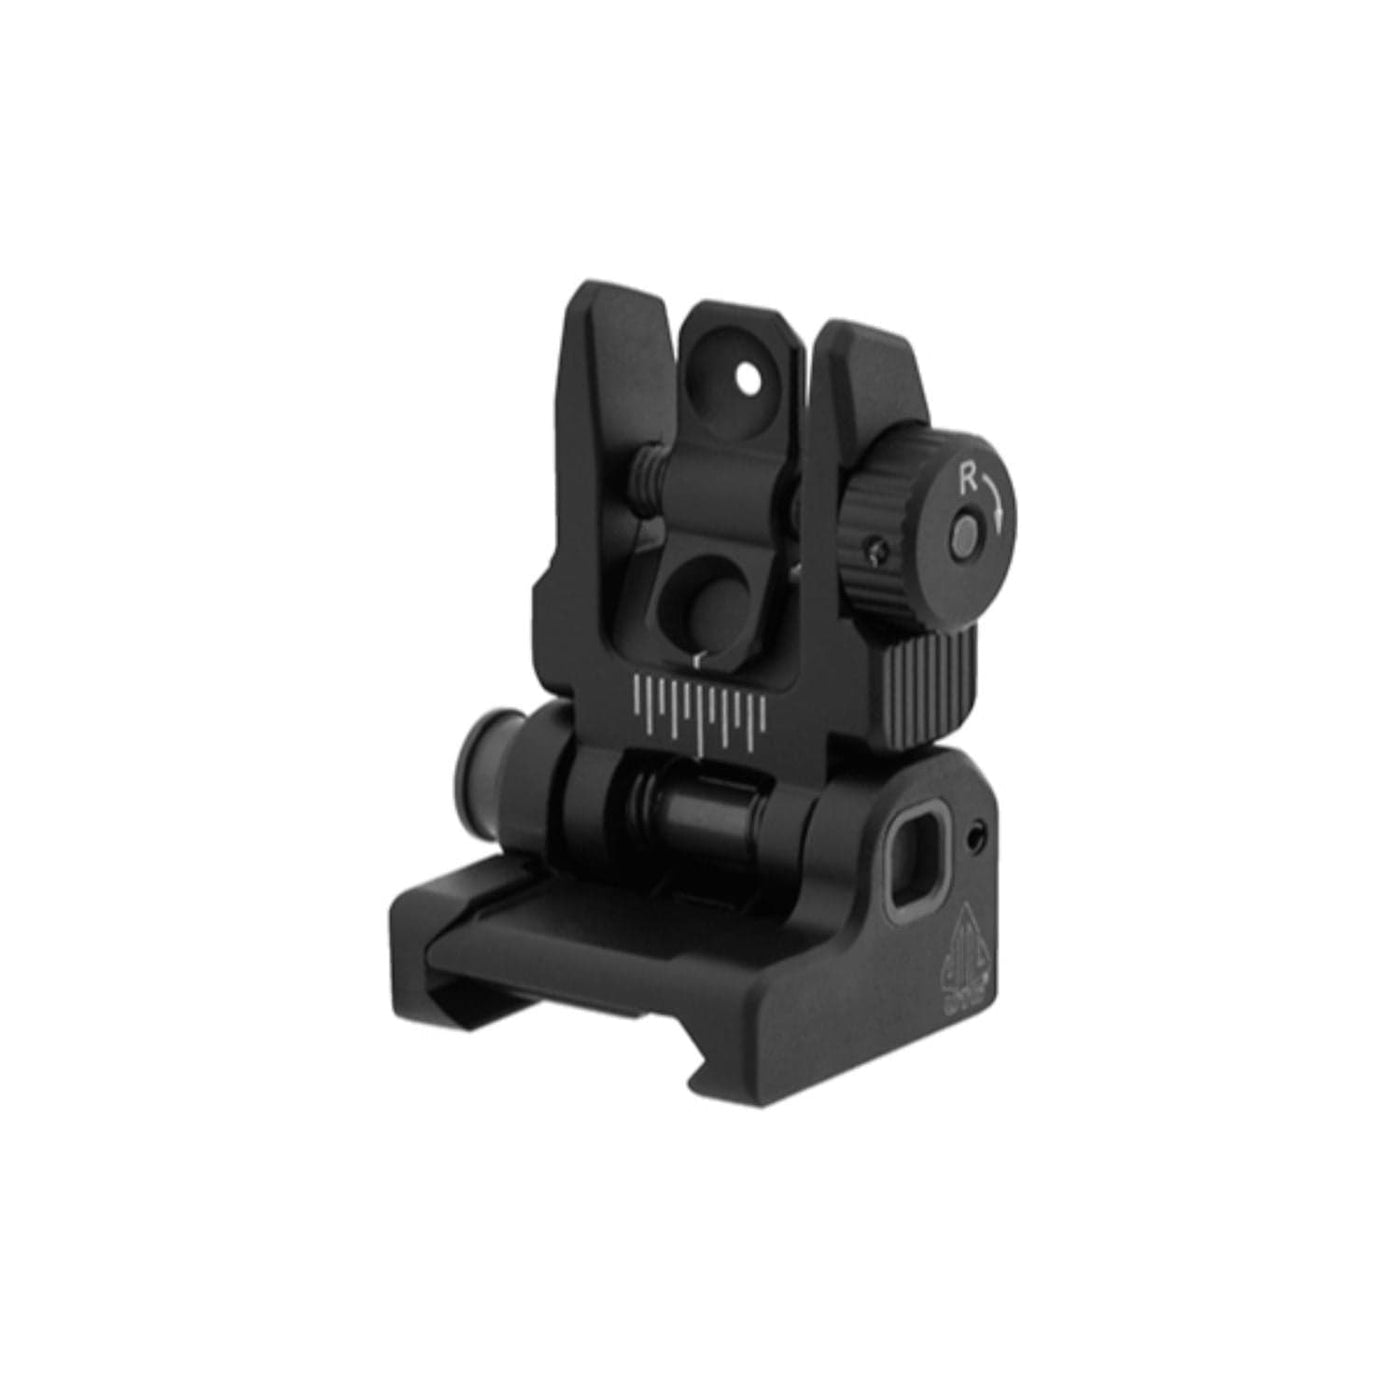 Leapers Leapers UTG ACCU-SYNC Spring-loaded AR15 Flip-up Rear Sight Optics And Sights